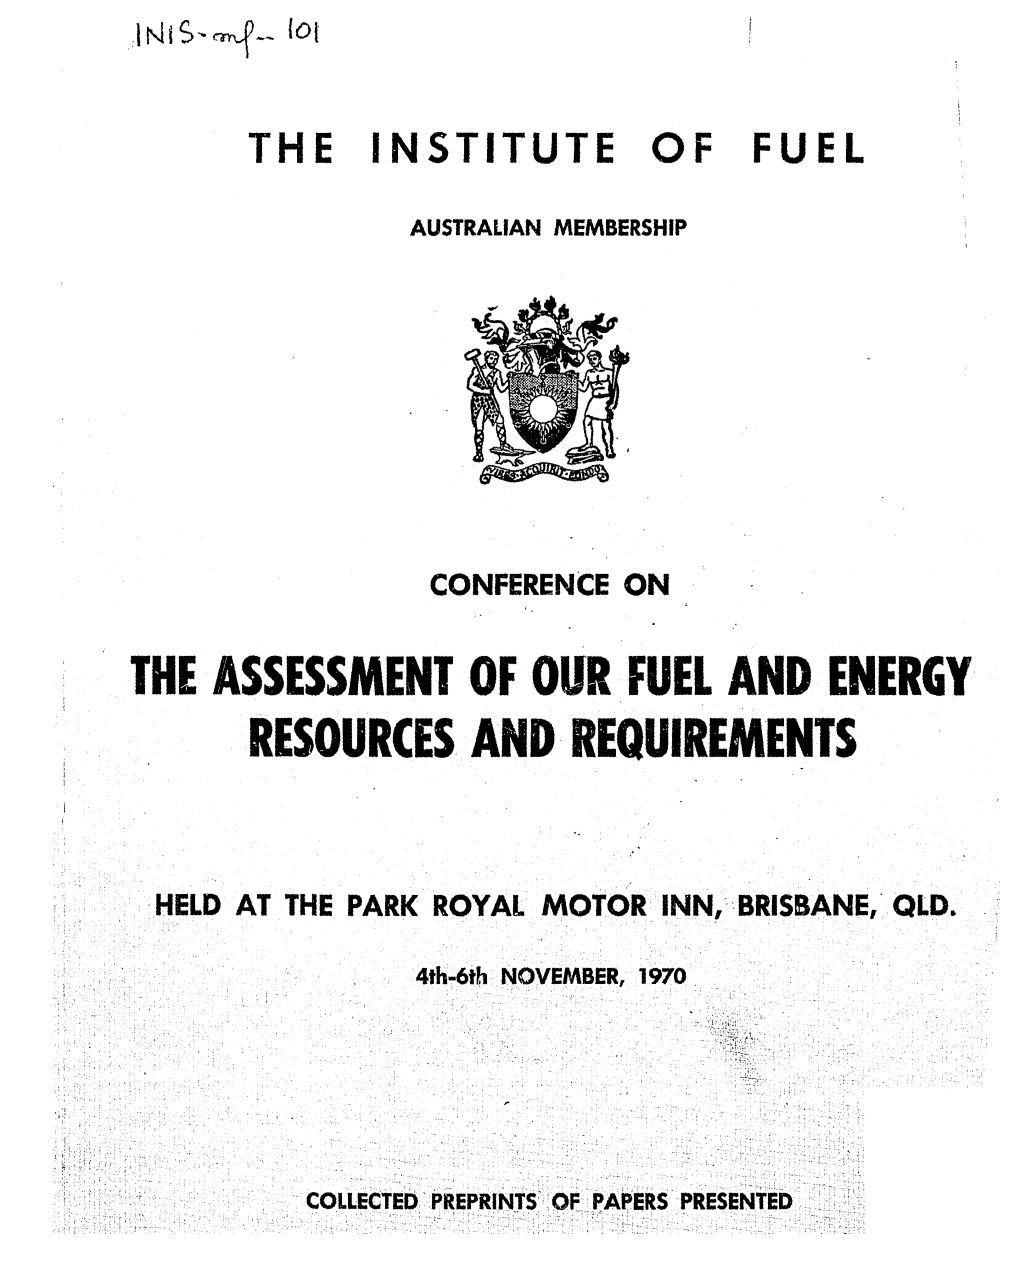 The Assessment of Our Fuel and Energy Resources and Requirements